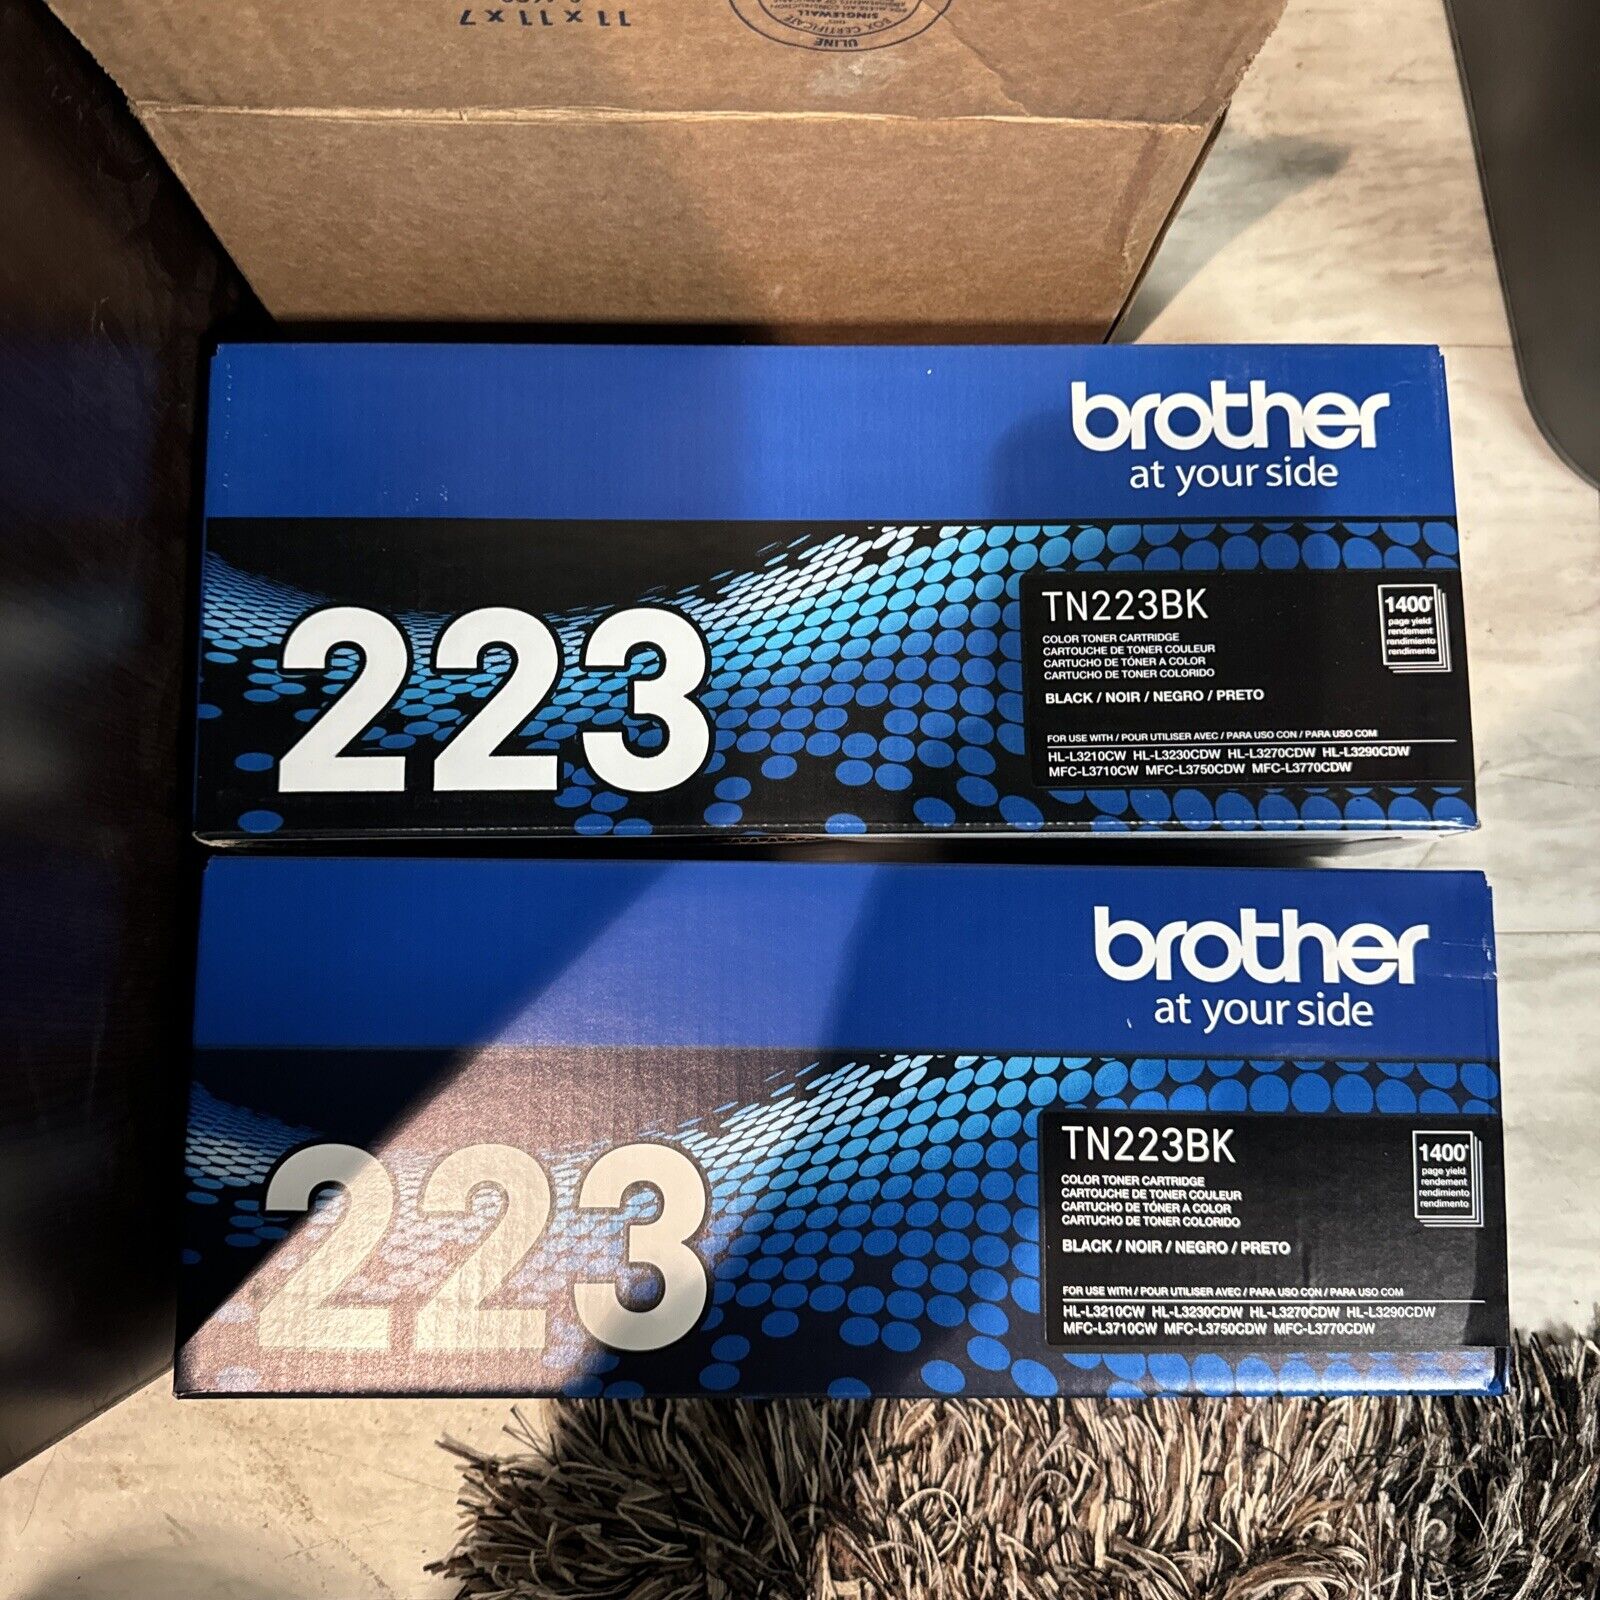 2 PACK - Brother TN223BK 1400 Page-Yield Toner - Black New